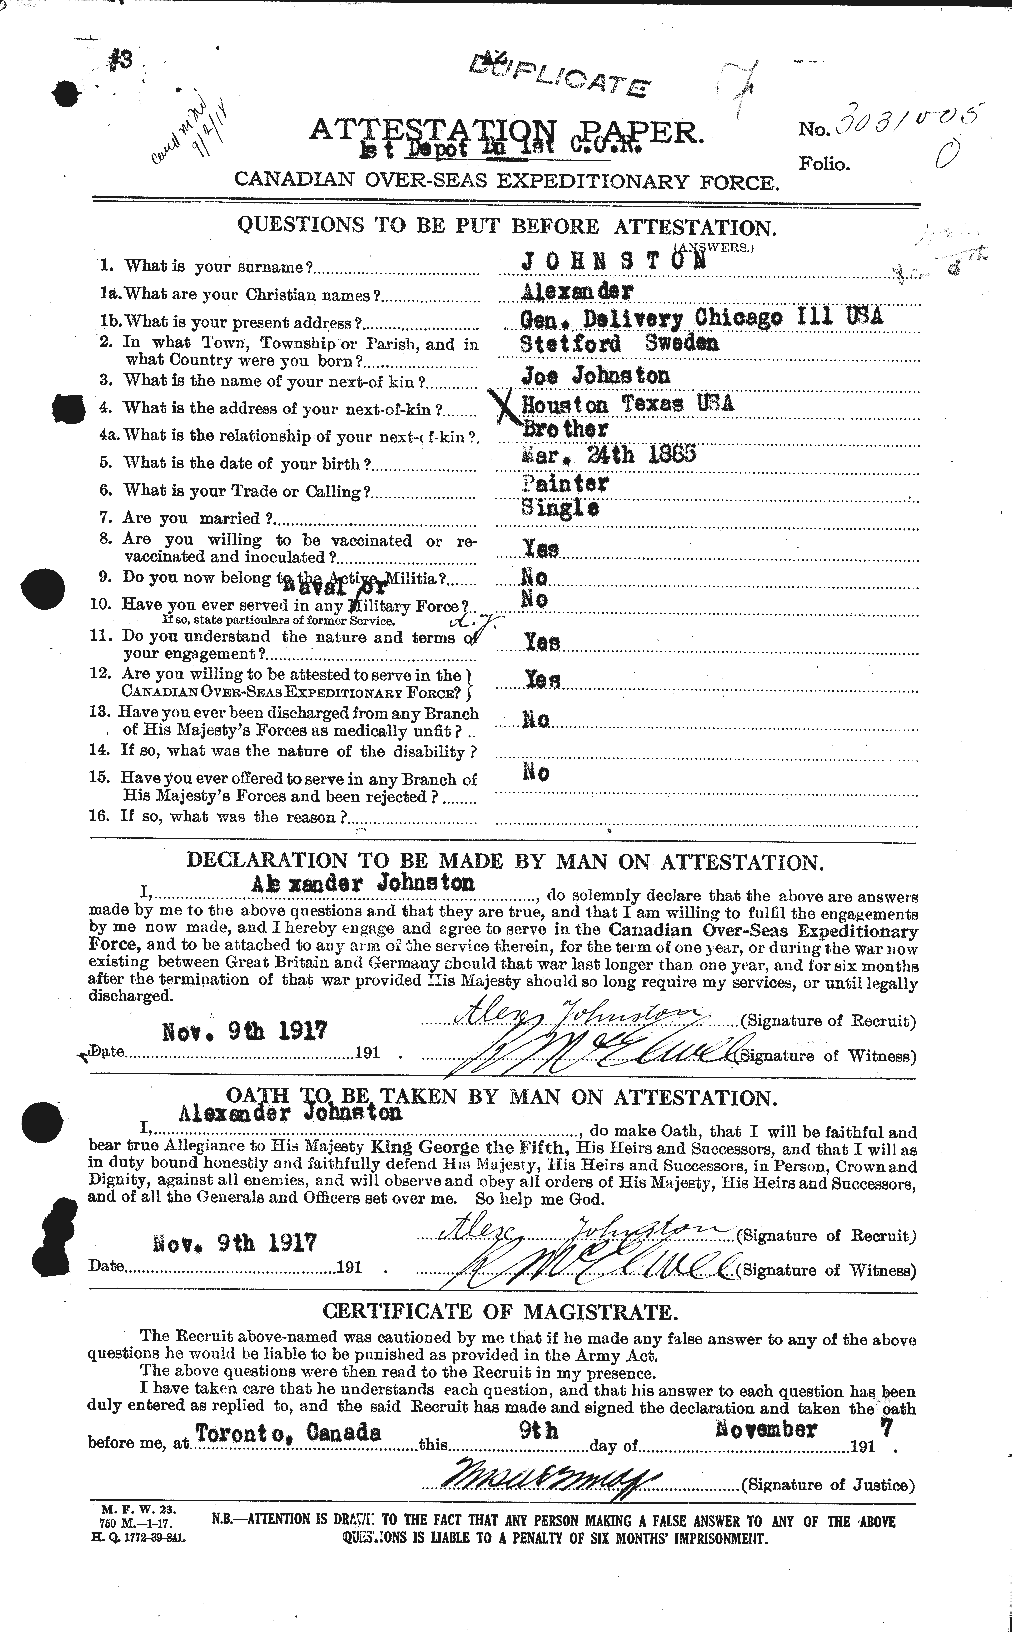 Personnel Records of the First World War - CEF 420963a